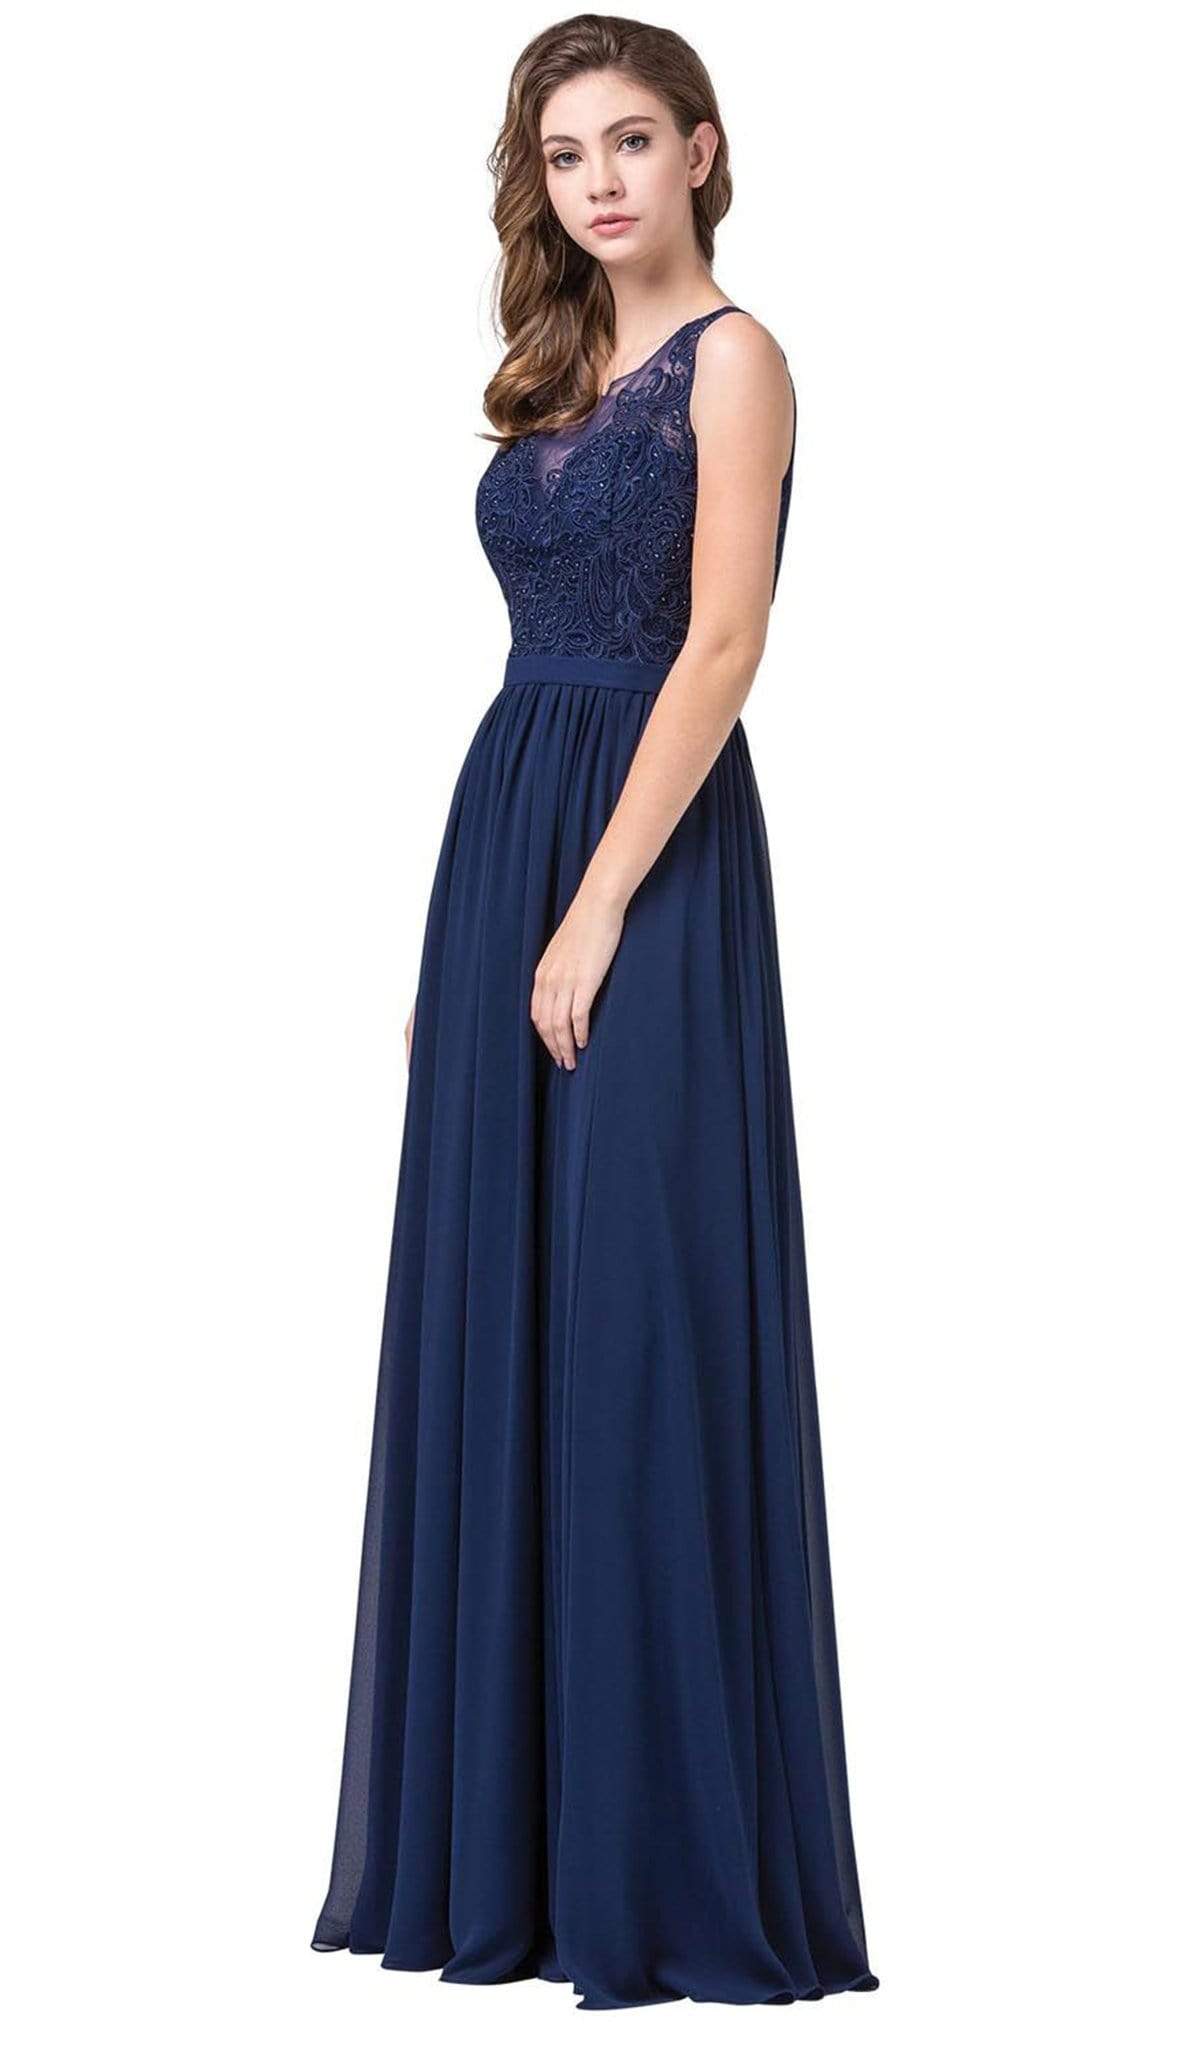 Dancing Queen - 2677 Illusion Neckline Beaded Lace Bodice Chiffon Gown
